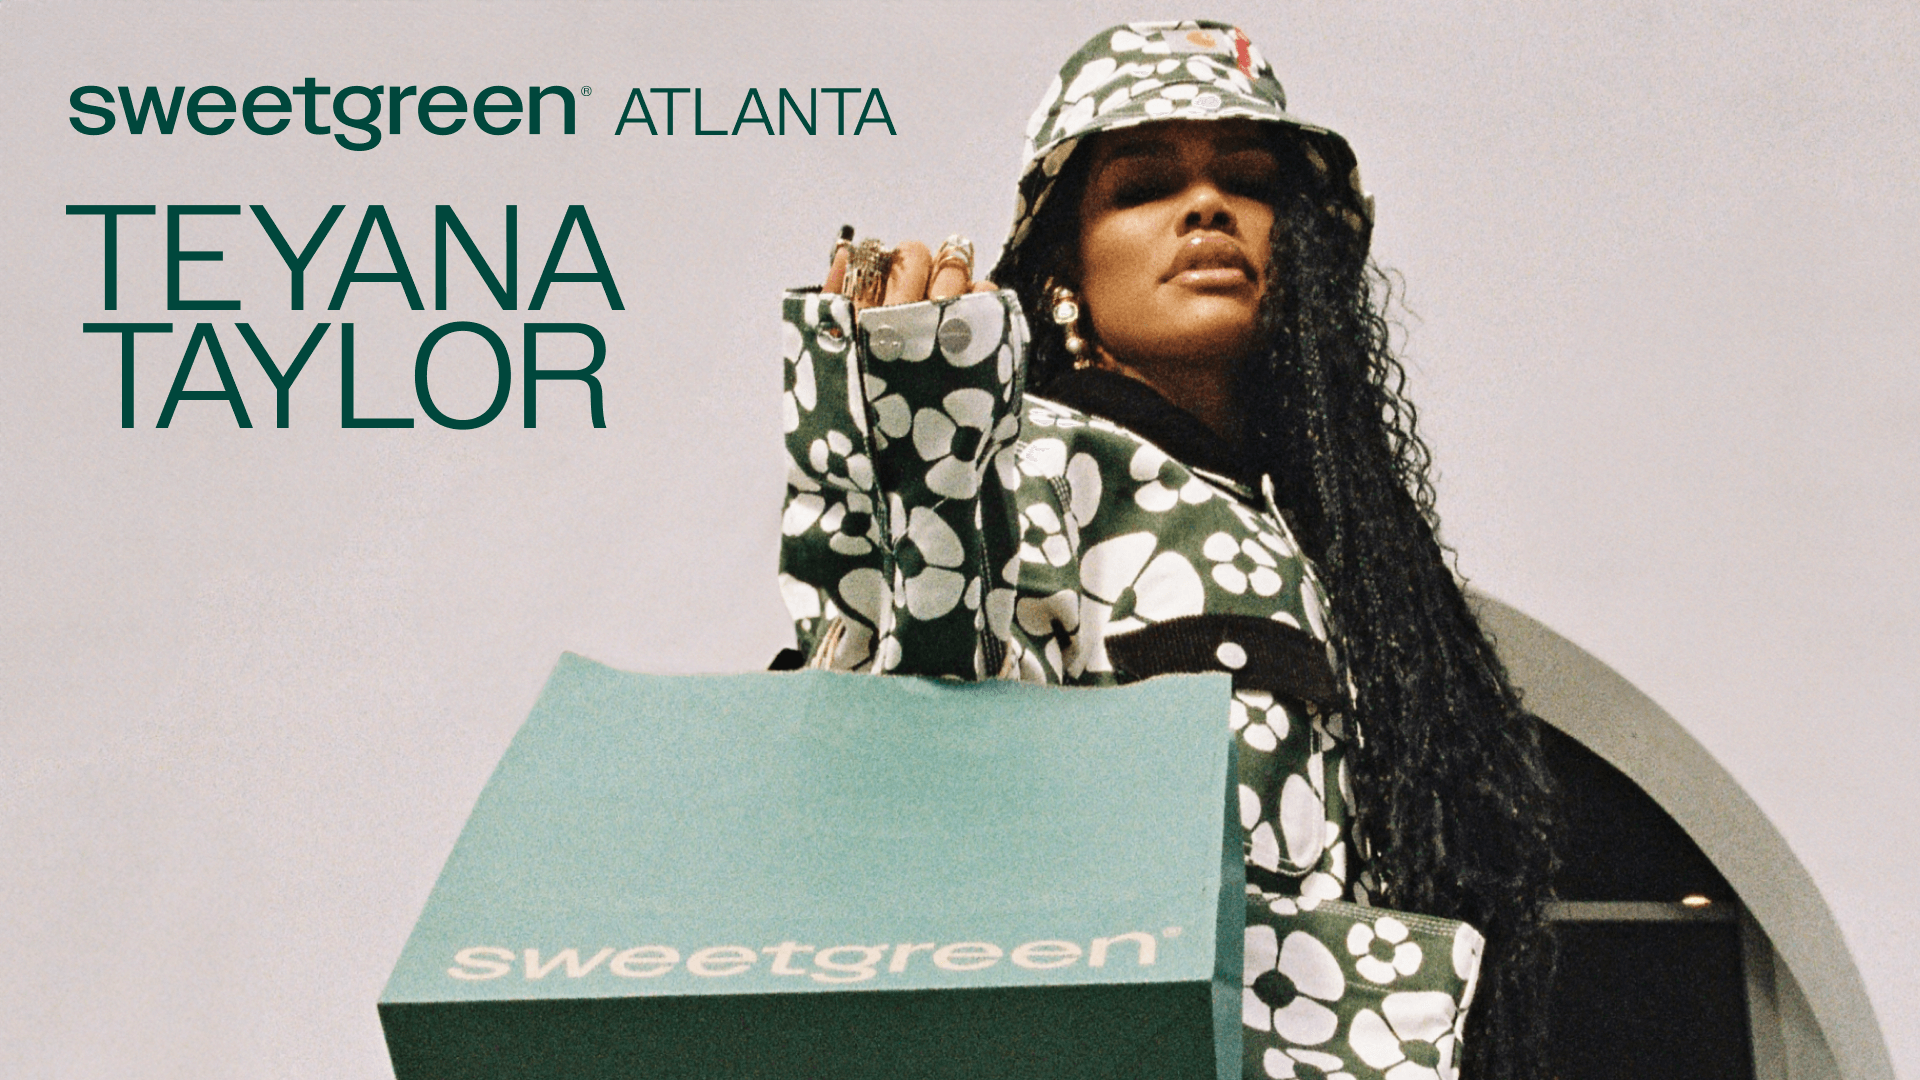 Teyana Taylor Secures Partnership With Sweetgreen To Help Support Single Mothers